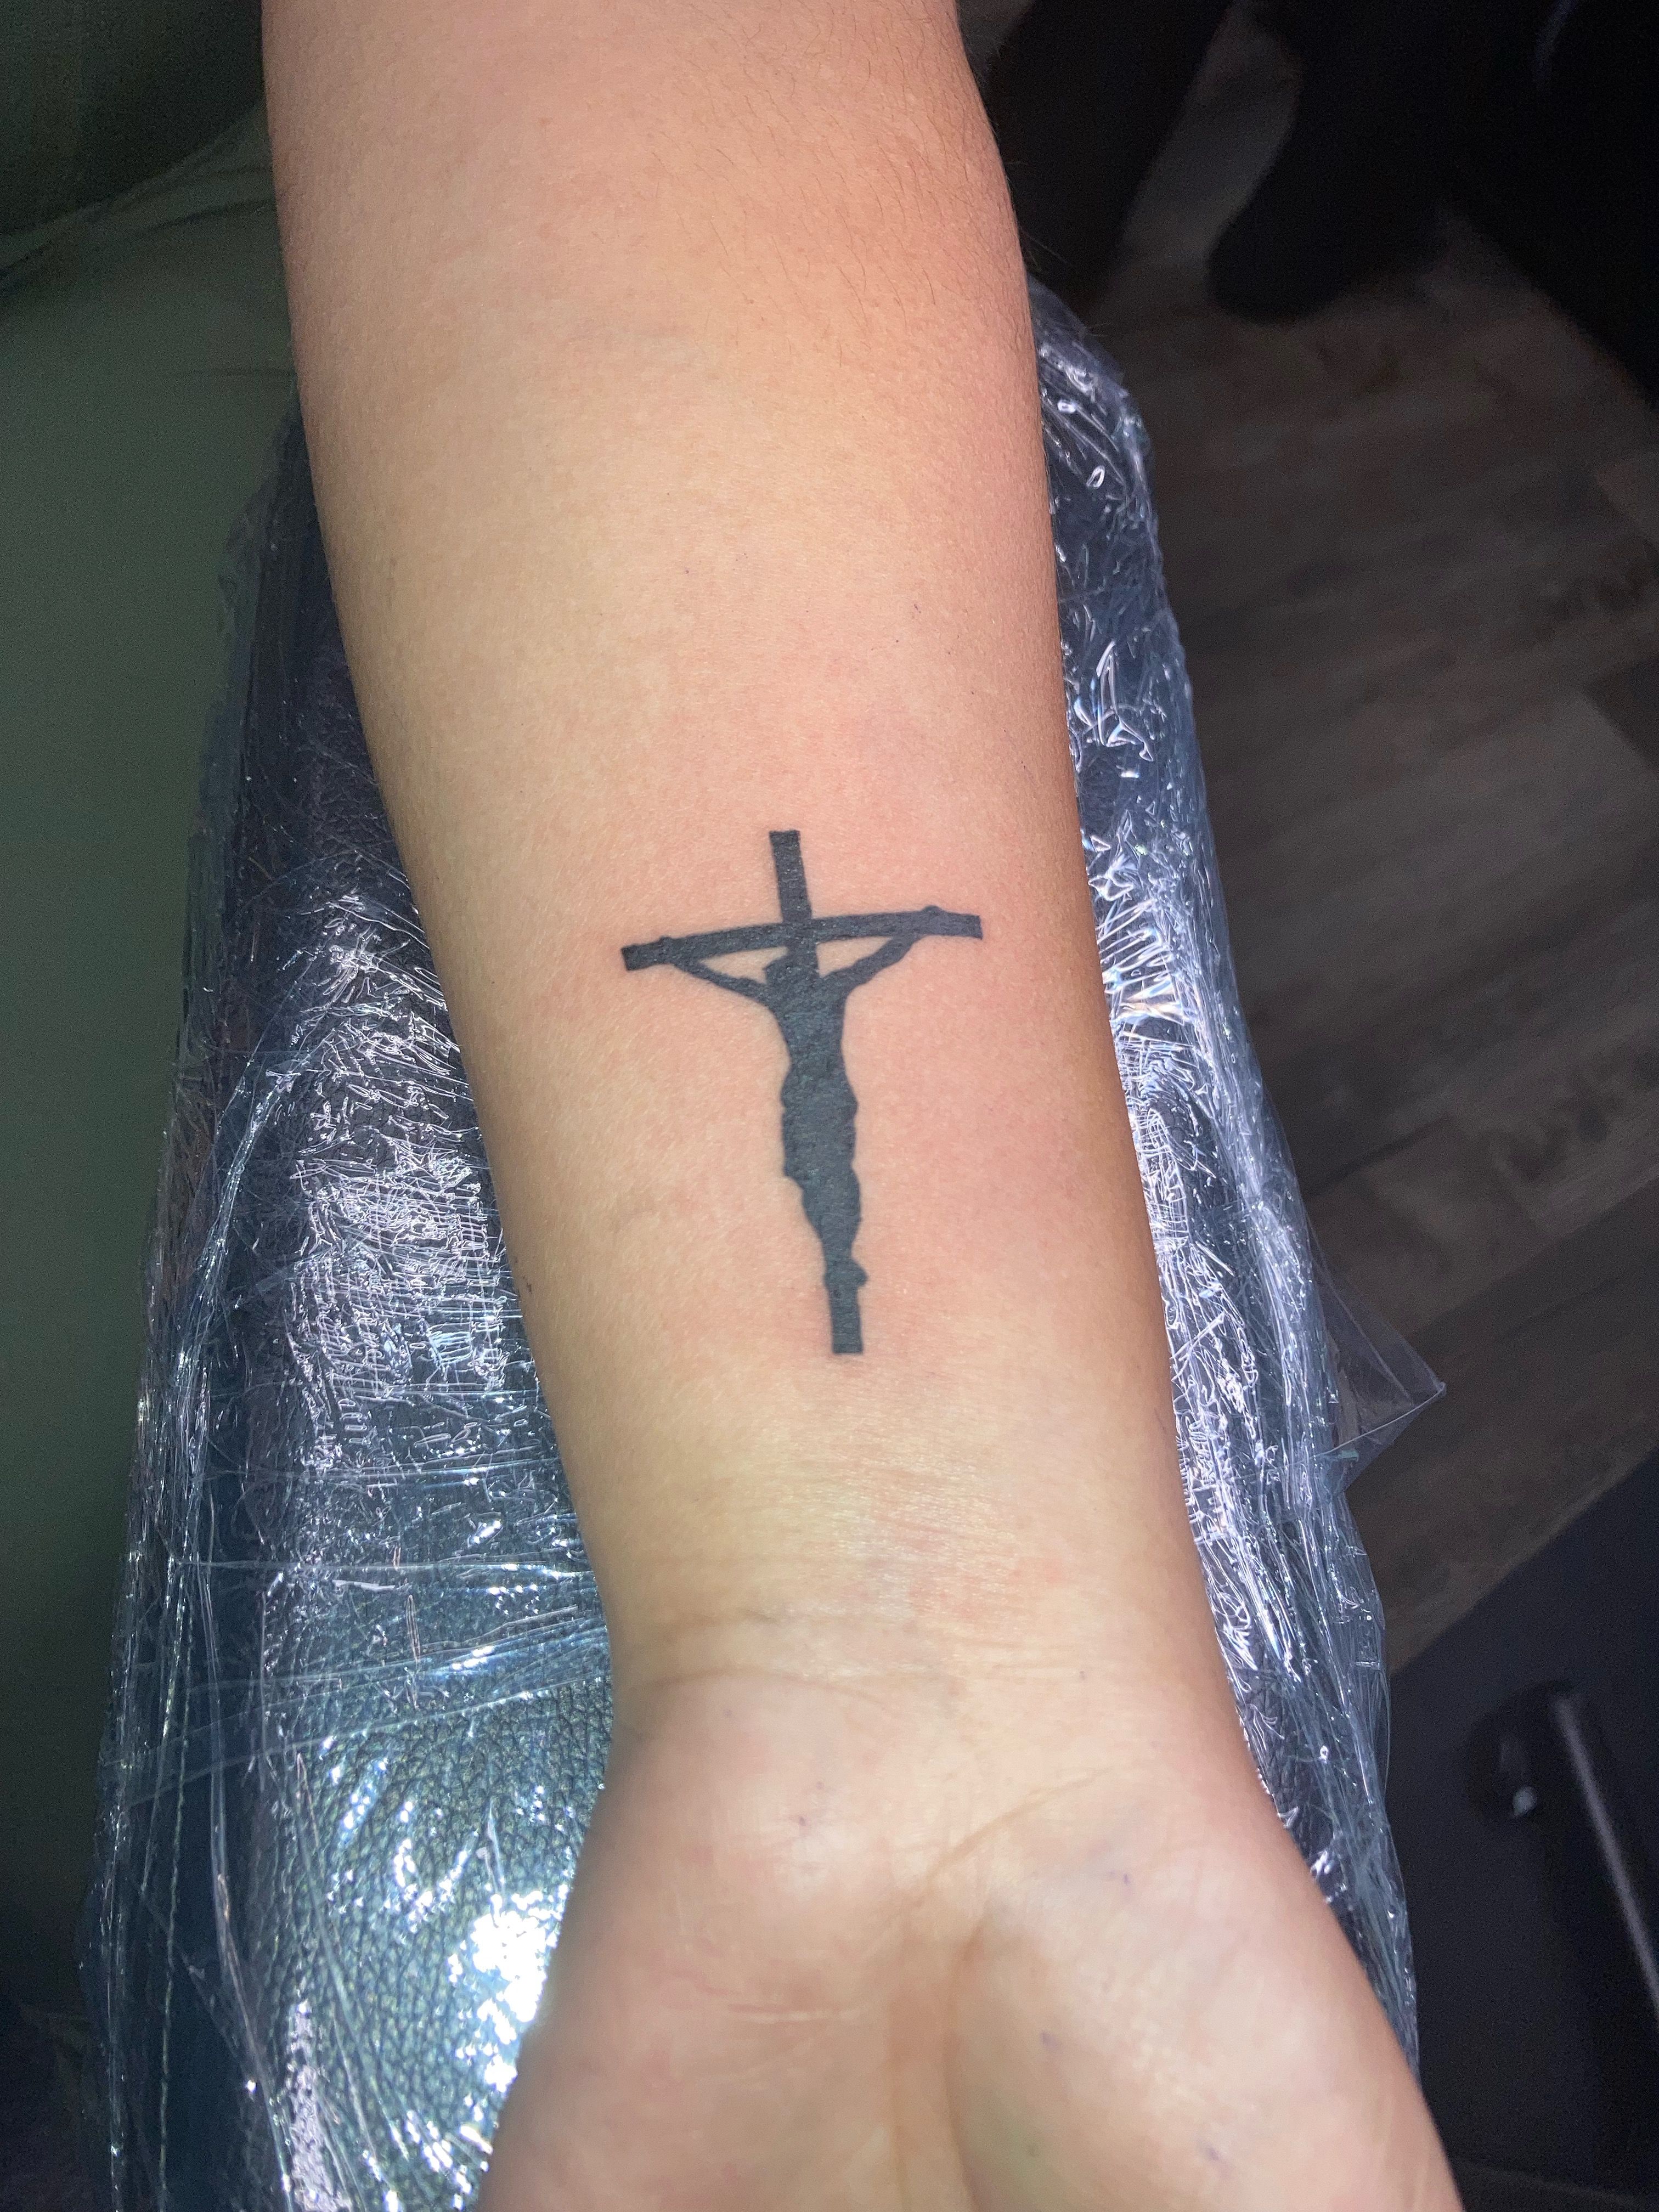 Frederica Mathewes-Green: Getting a Coptic Cross Tattoo - Coptic Voice